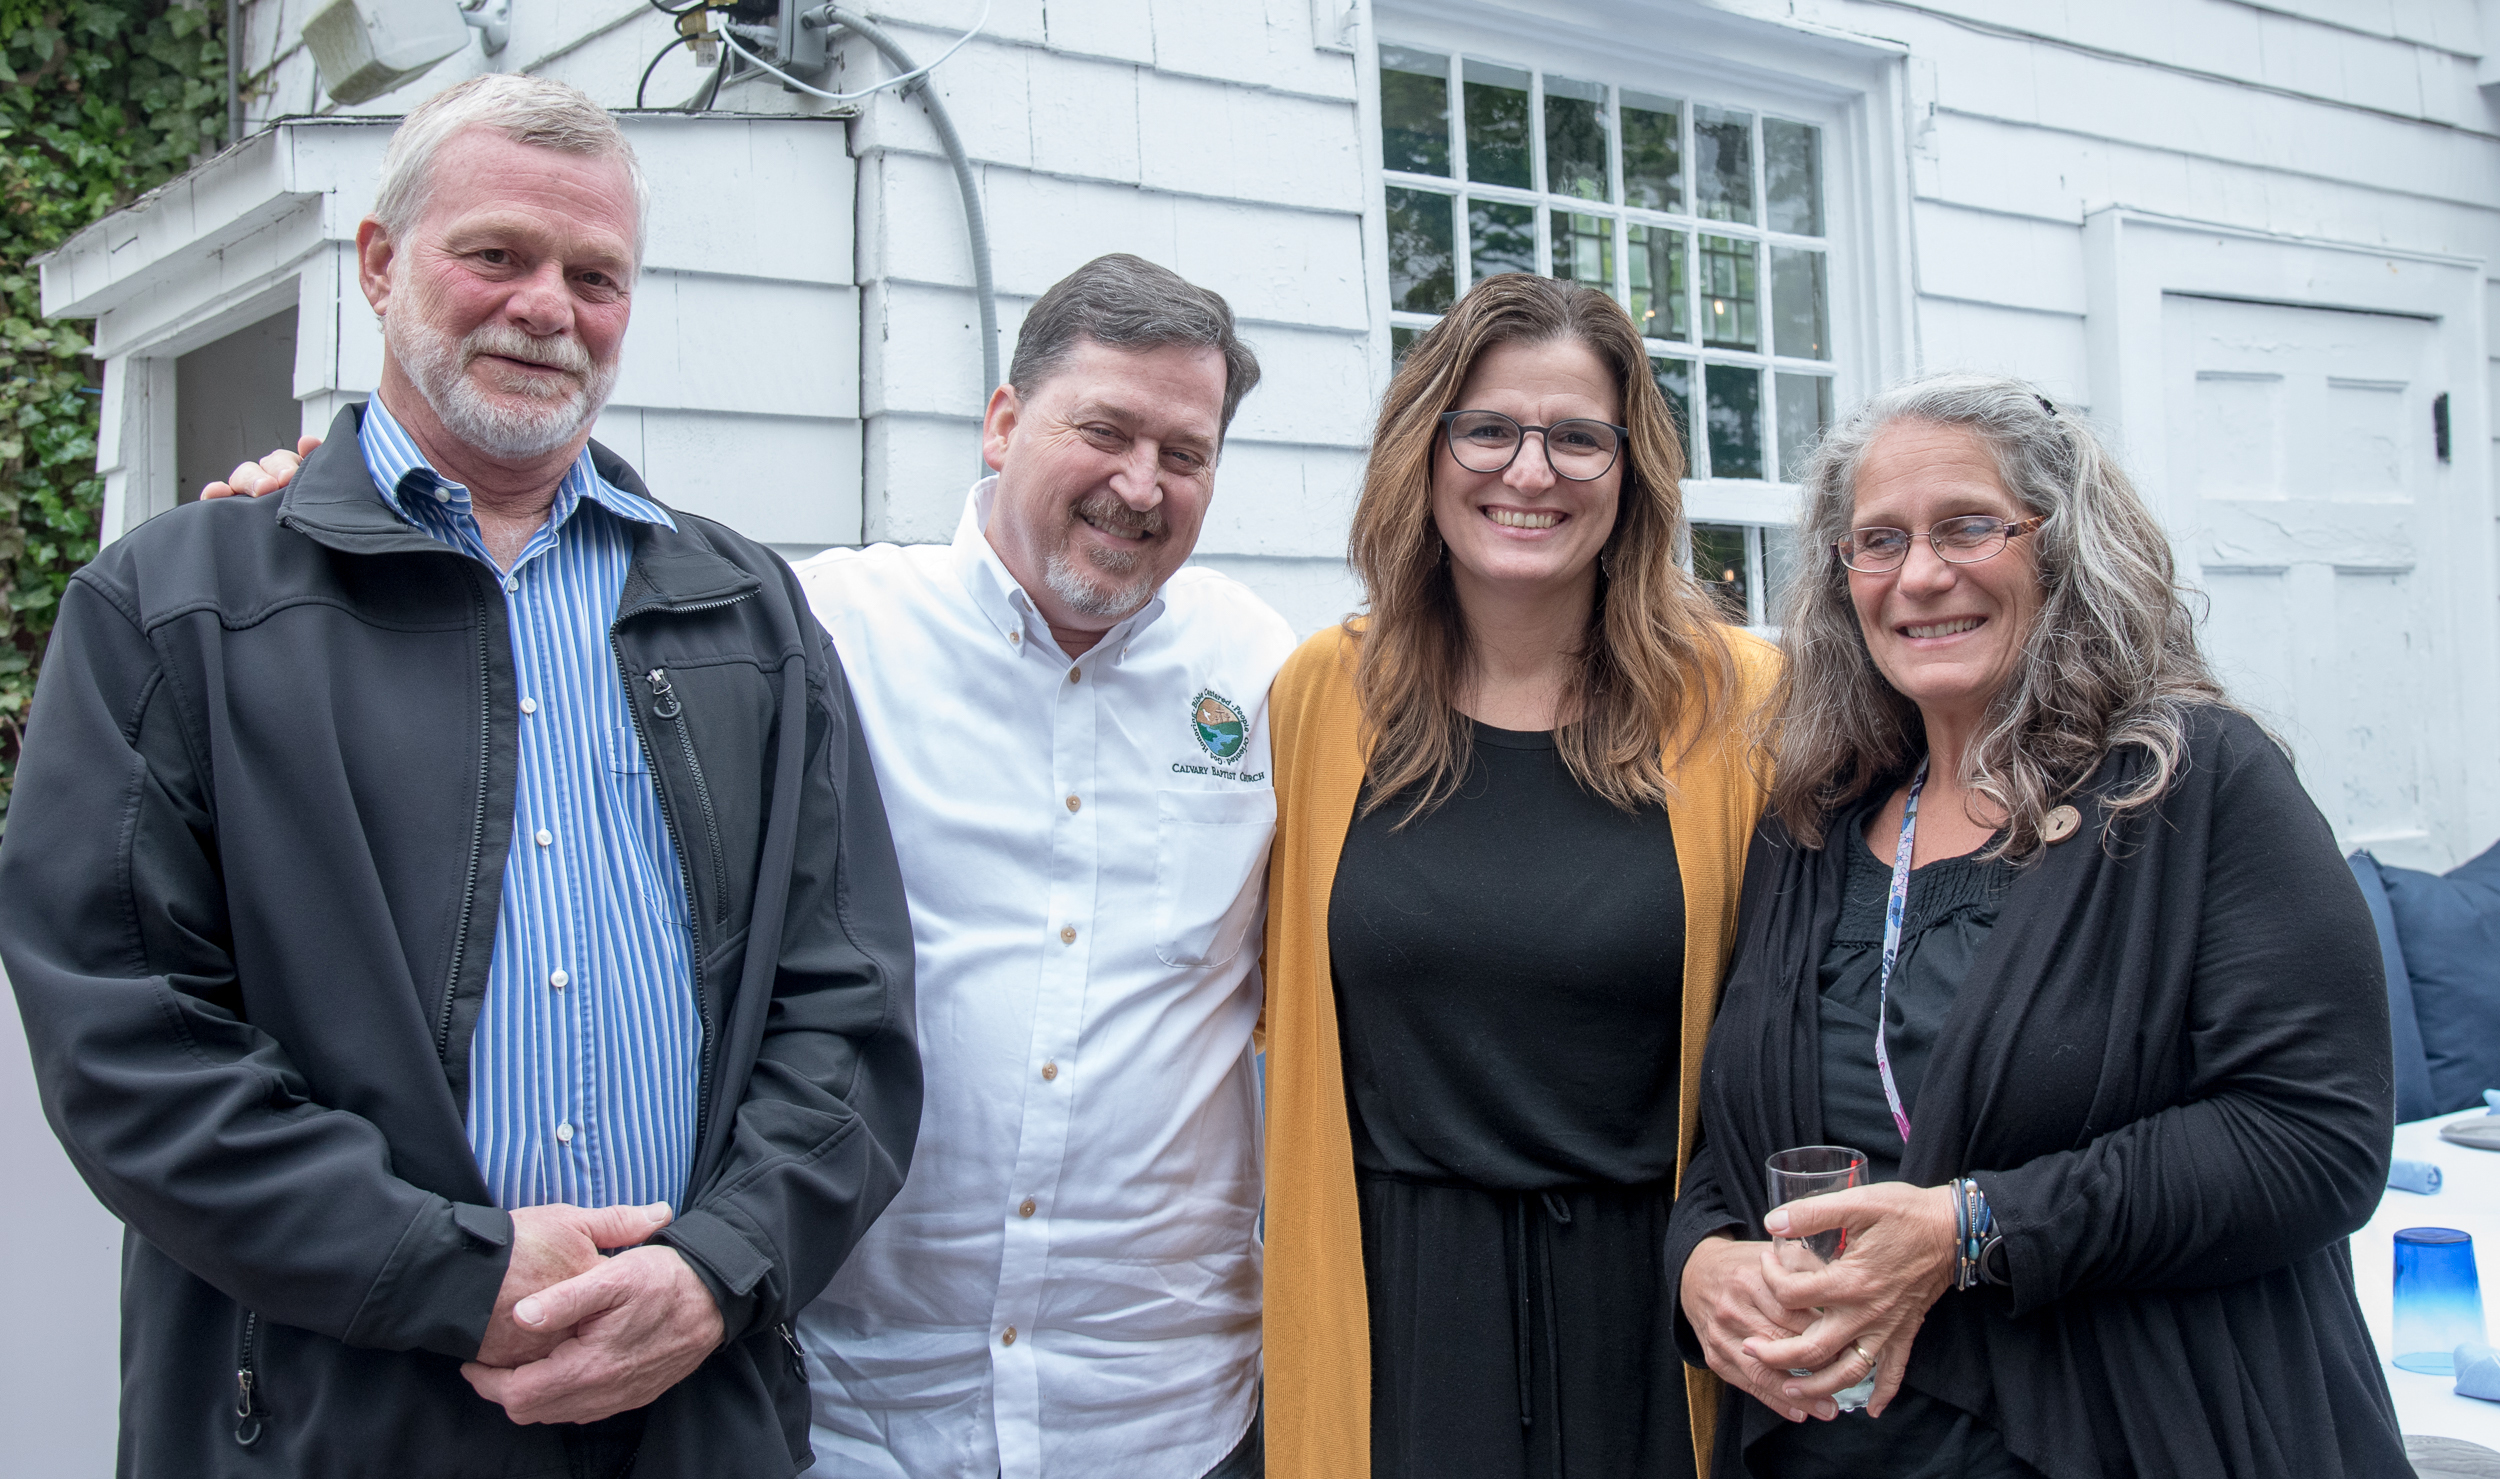 Rick Tamraz, Pastor David Cooke, Christina Cooke and Laurie Whittemore at the Maureen's Haven Homeless Outreach Volunteer Thank You dinner on Friday evening at Blu Mar Hamptons in Southampton Village.   LISA TAMBURINI